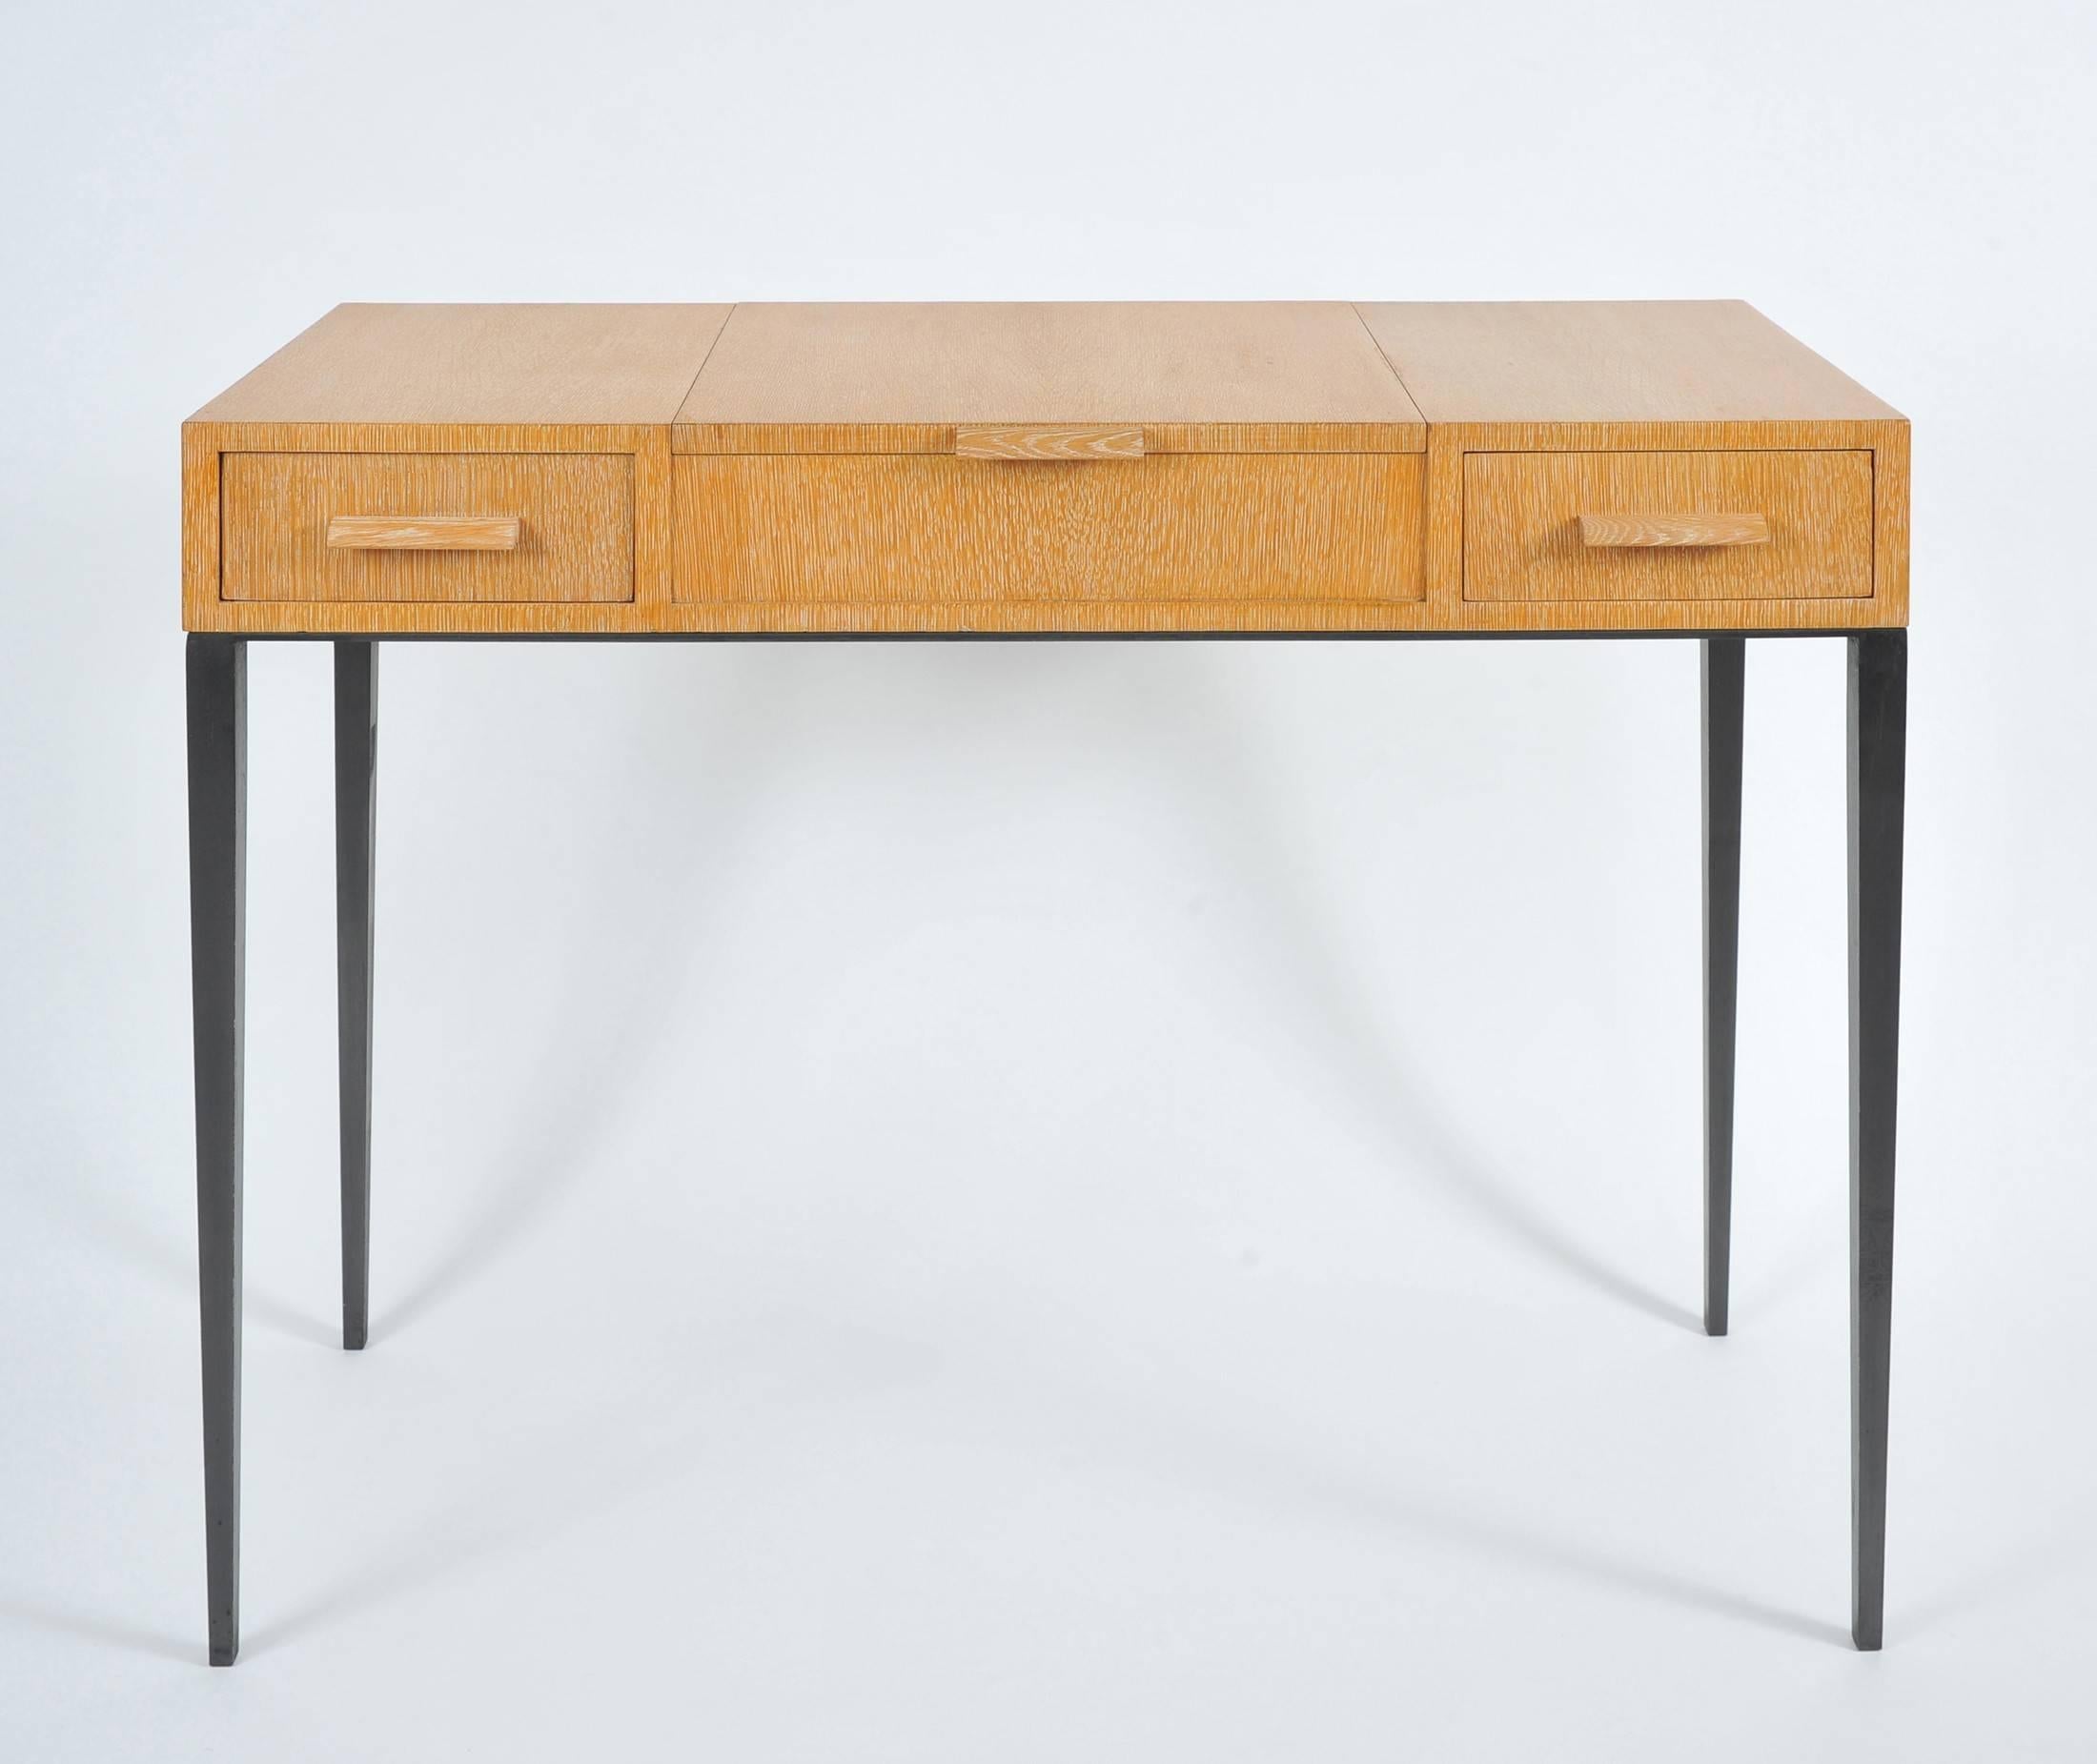 In 1931, Jean-Michel Frank designed a three-drawer ‘bureau-plat’, or console desk, based on a Louis XVI model from which he removed all ornamentation. A year later, Frank founded the company Comte in collaboration with Argentinian architects. For